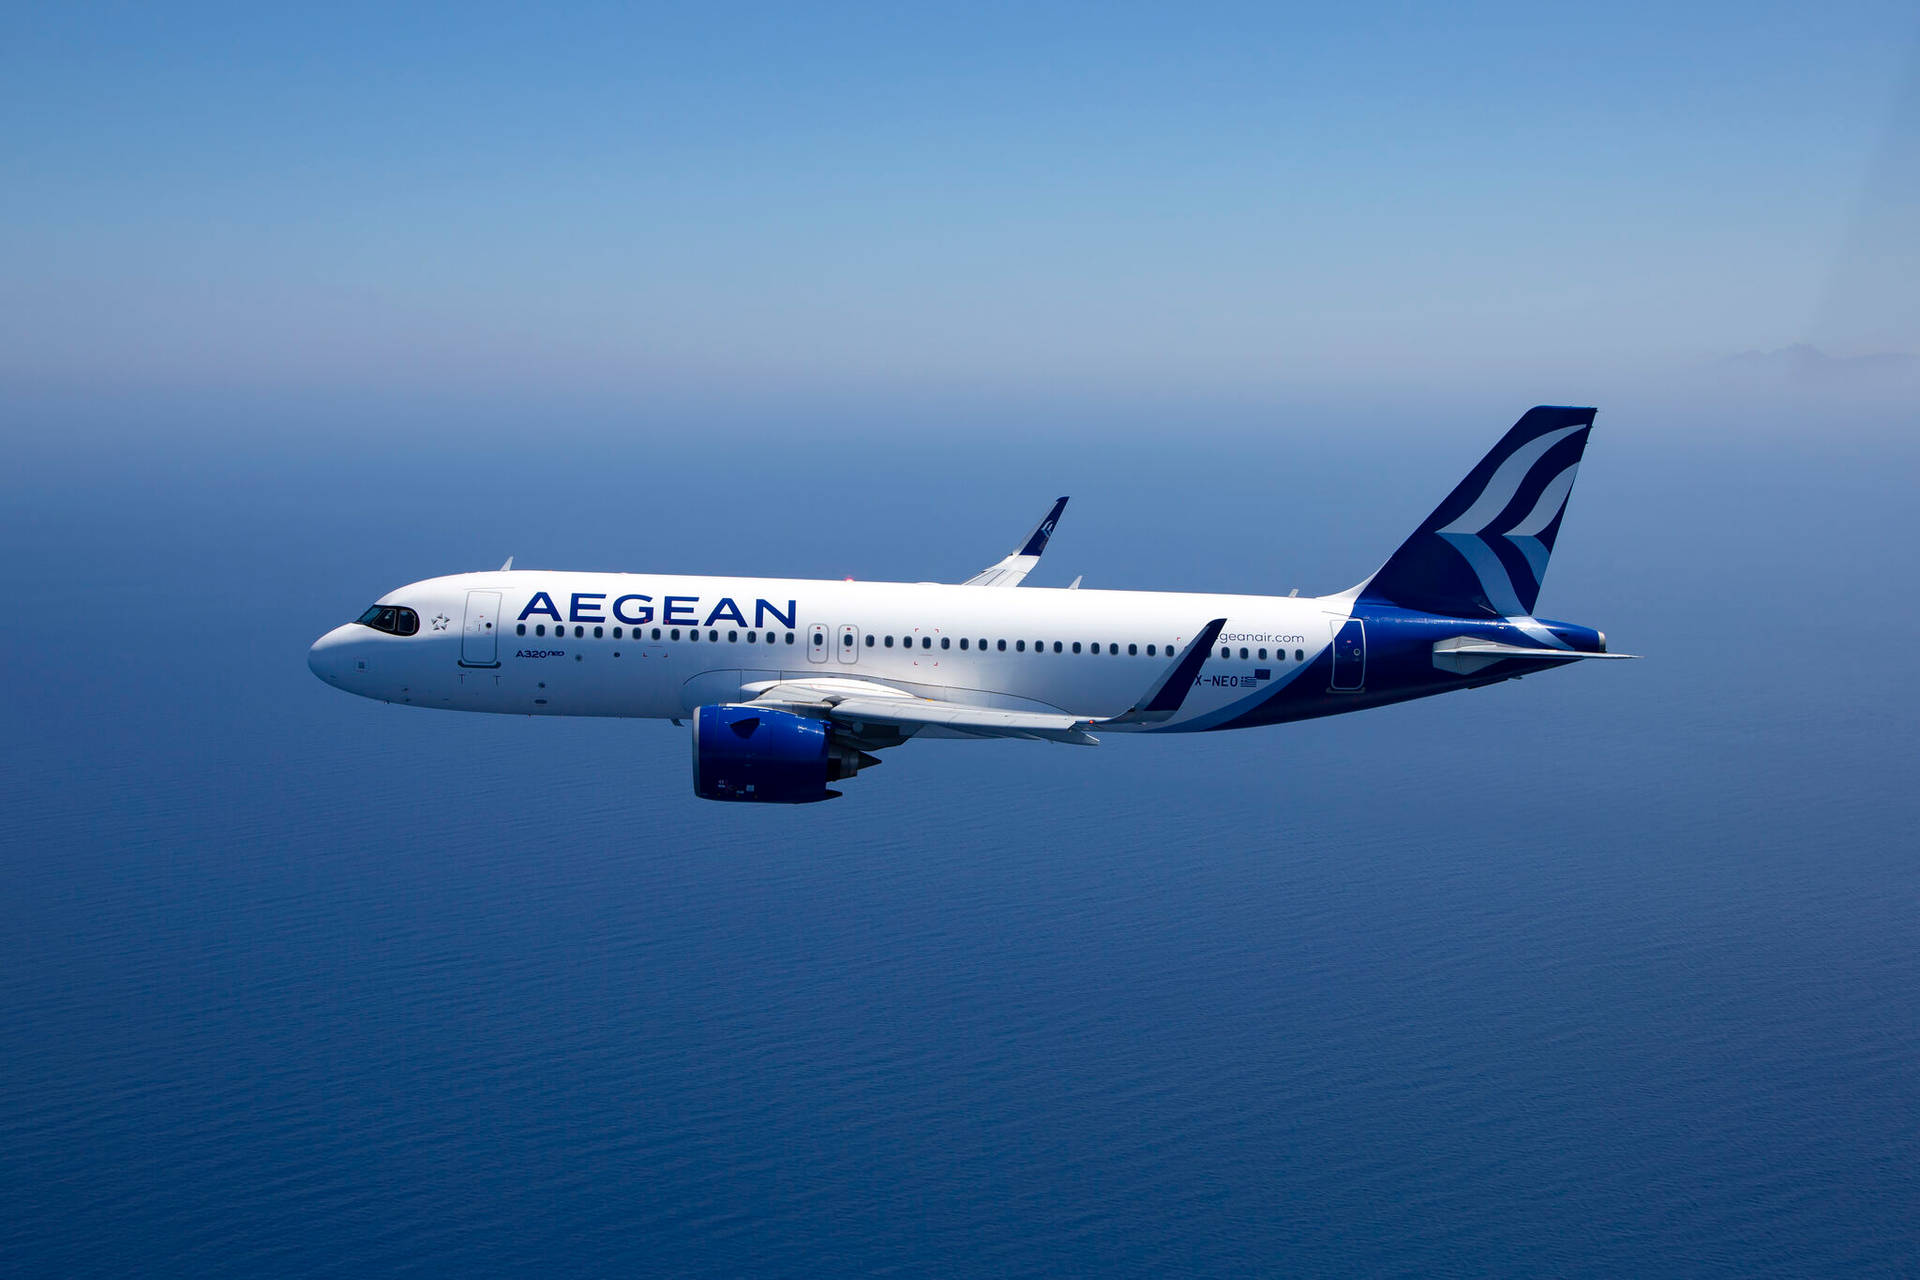 Majestic Aegean Airlines A320neo Jet Takes Flight against Azure Sky Wallpaper